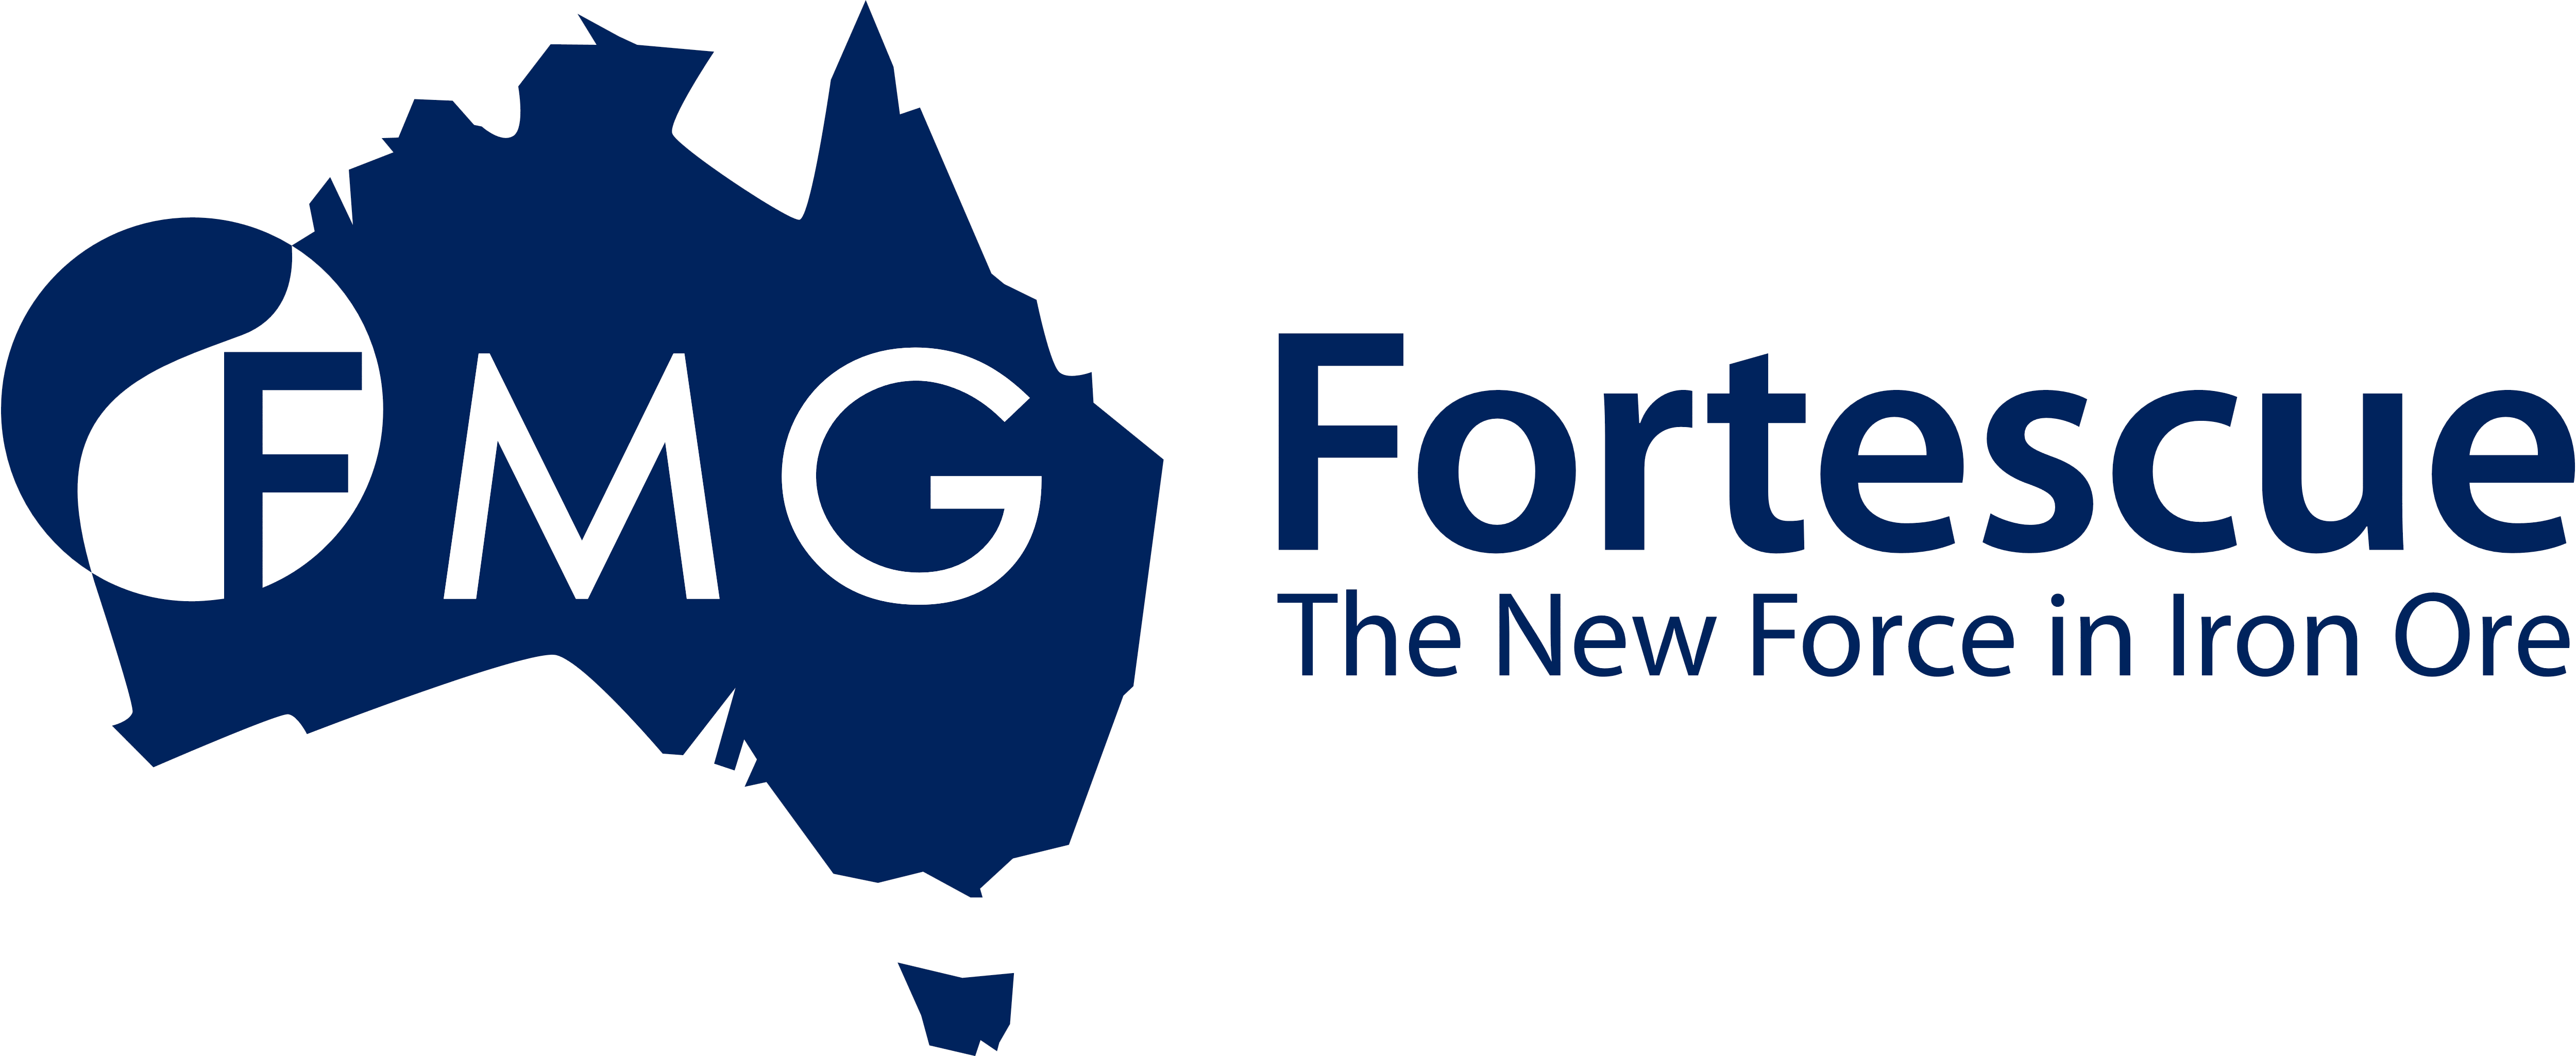 FMG_Fortescue_Metals_Group_logo